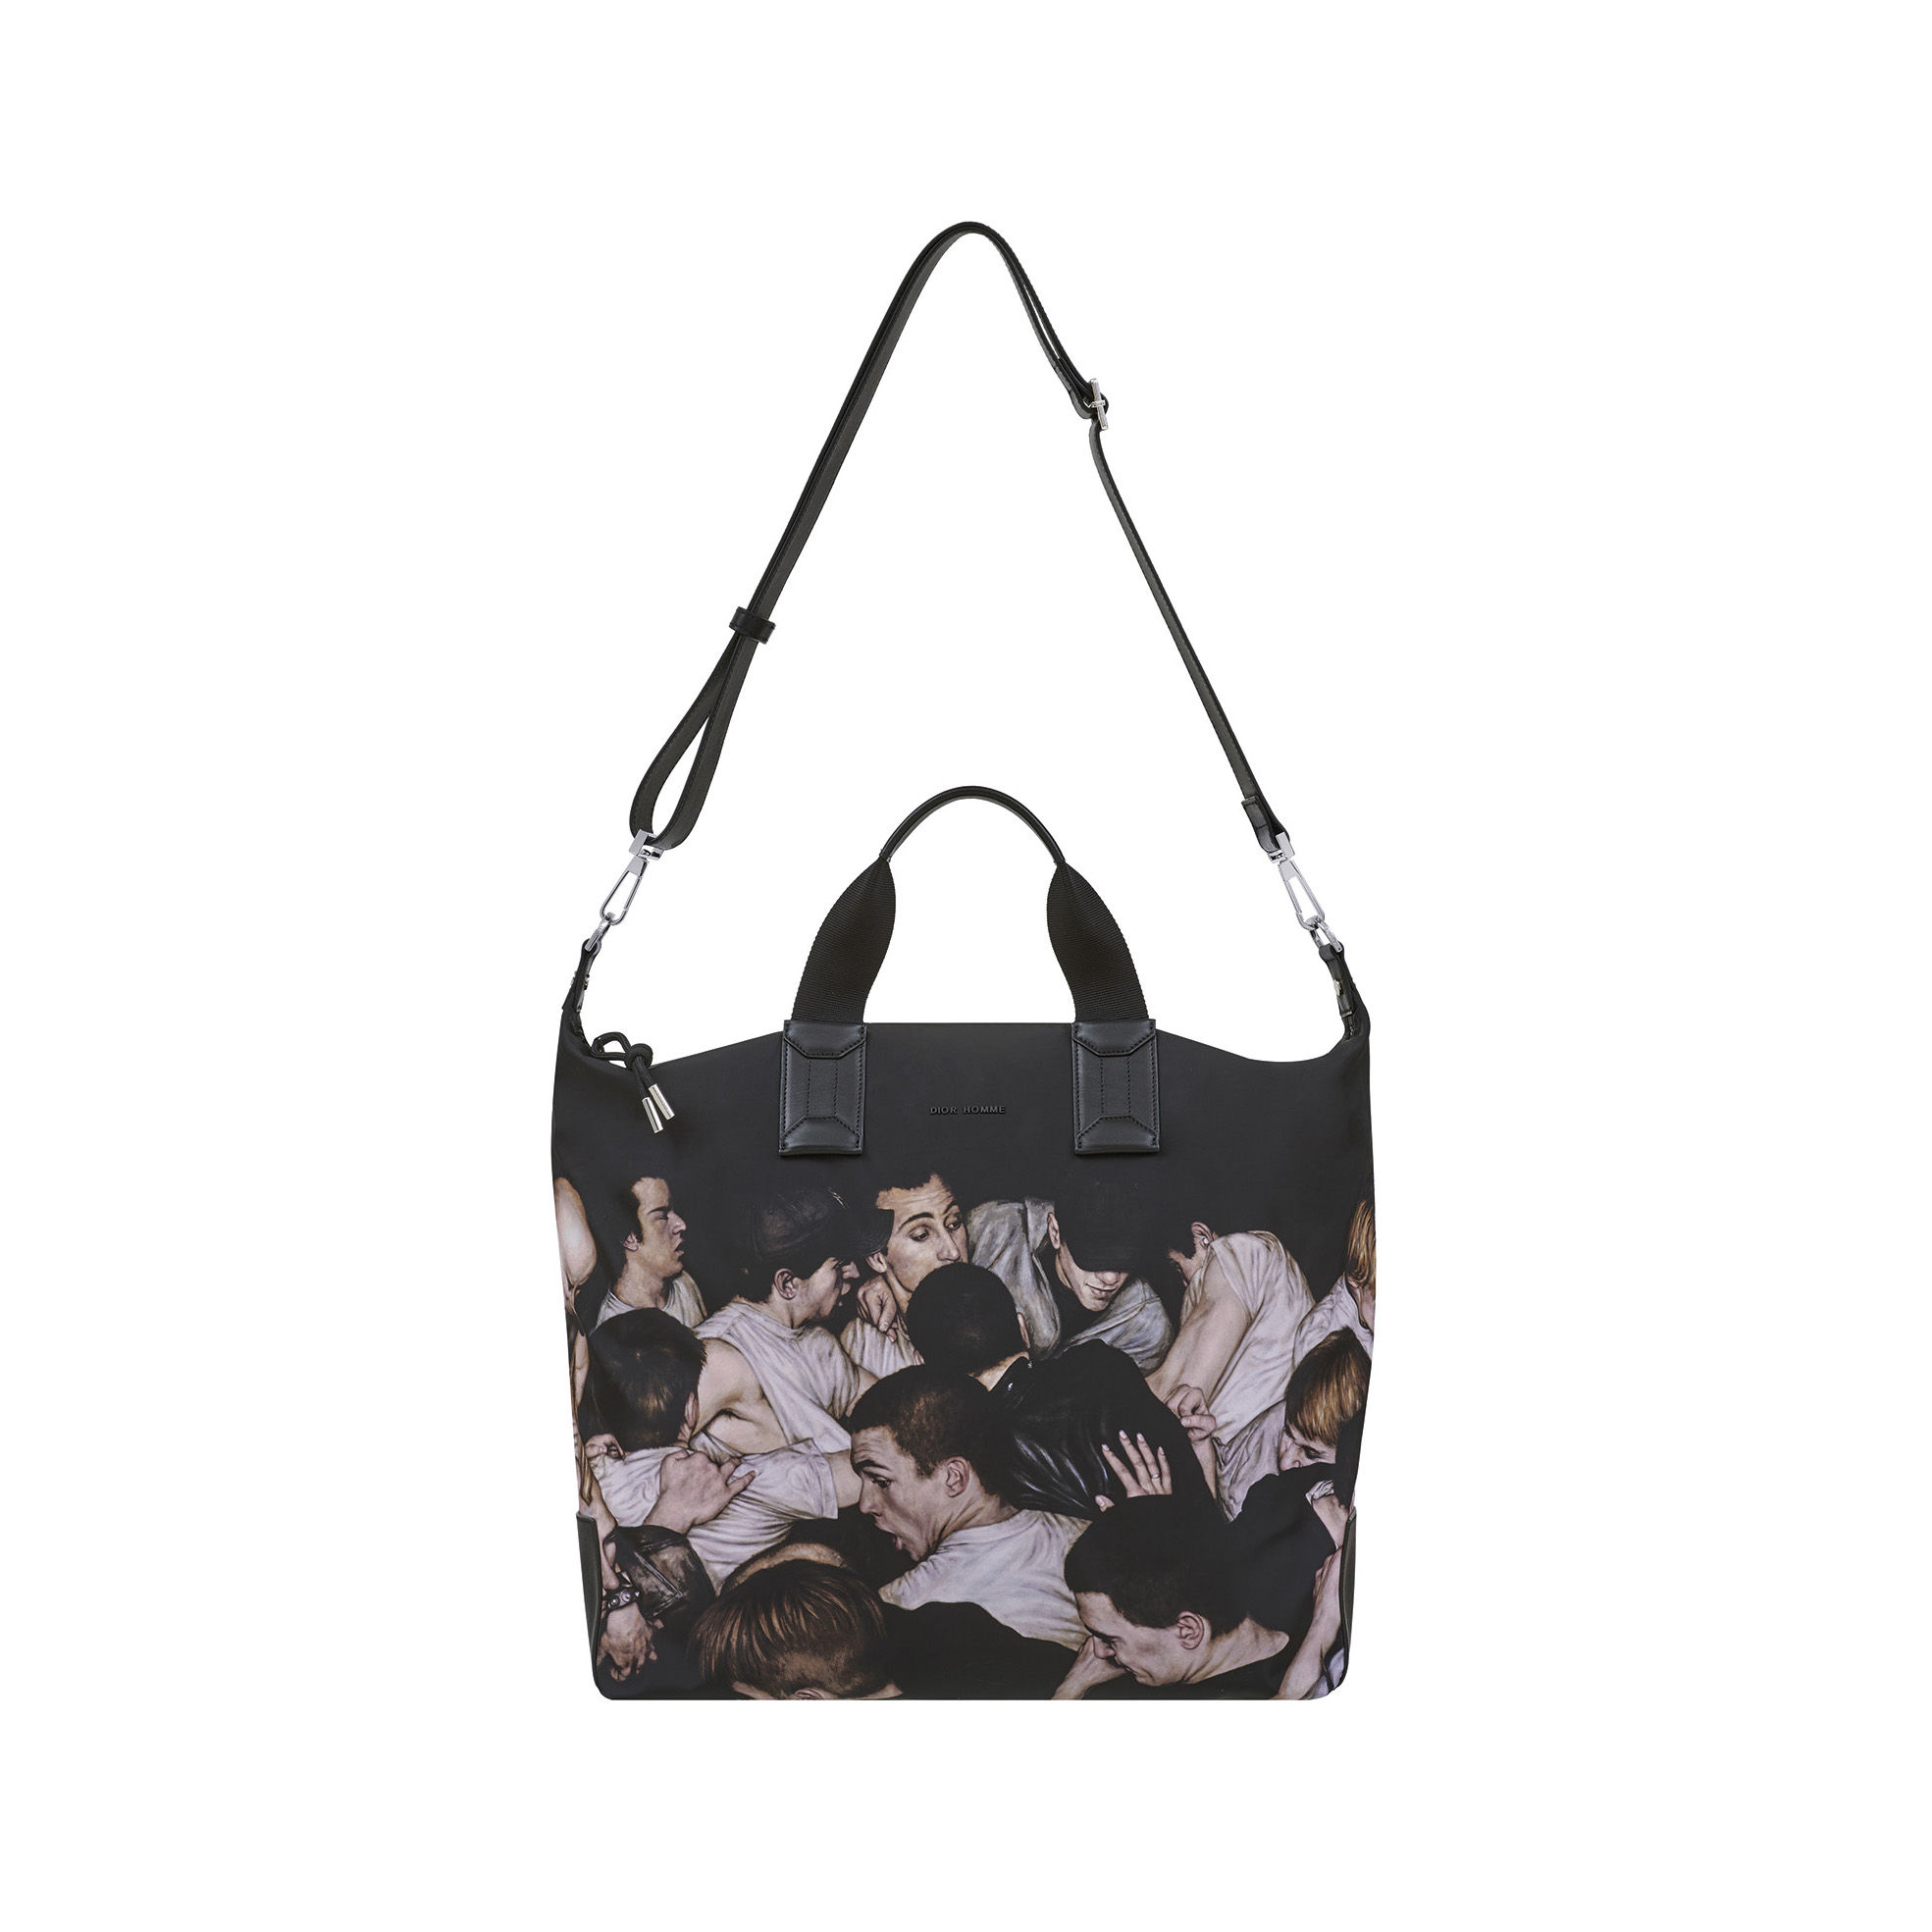 Dior Homme nylon tote with mosh pits print and black calfskin